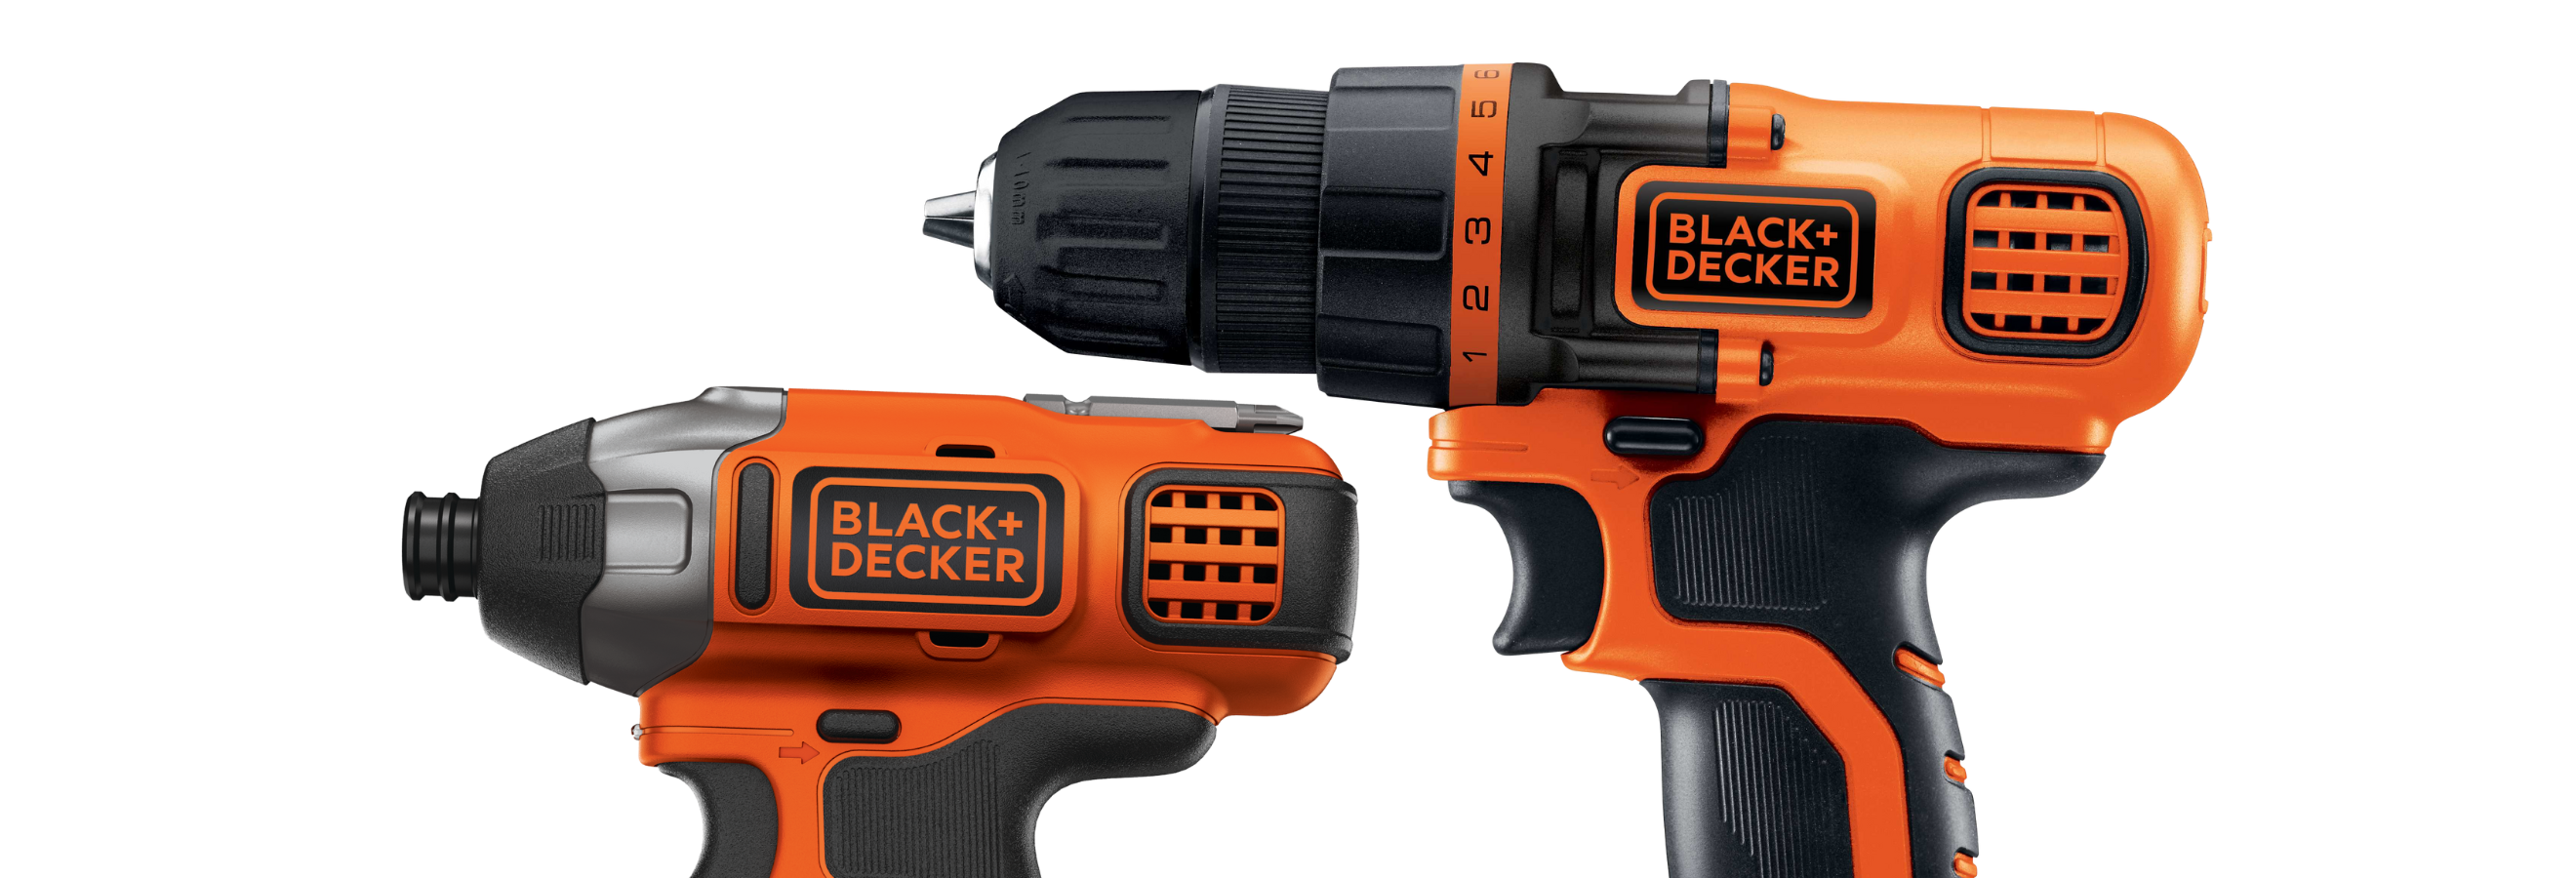 BLACK+DECKER 20V MAX Cordless Drill and Impact Driver, Power Tool Combo Kit  with Battery and Charger (BD2KITCDDI) 20V MAX* Drill/Driver and Impact  Combo Kit 